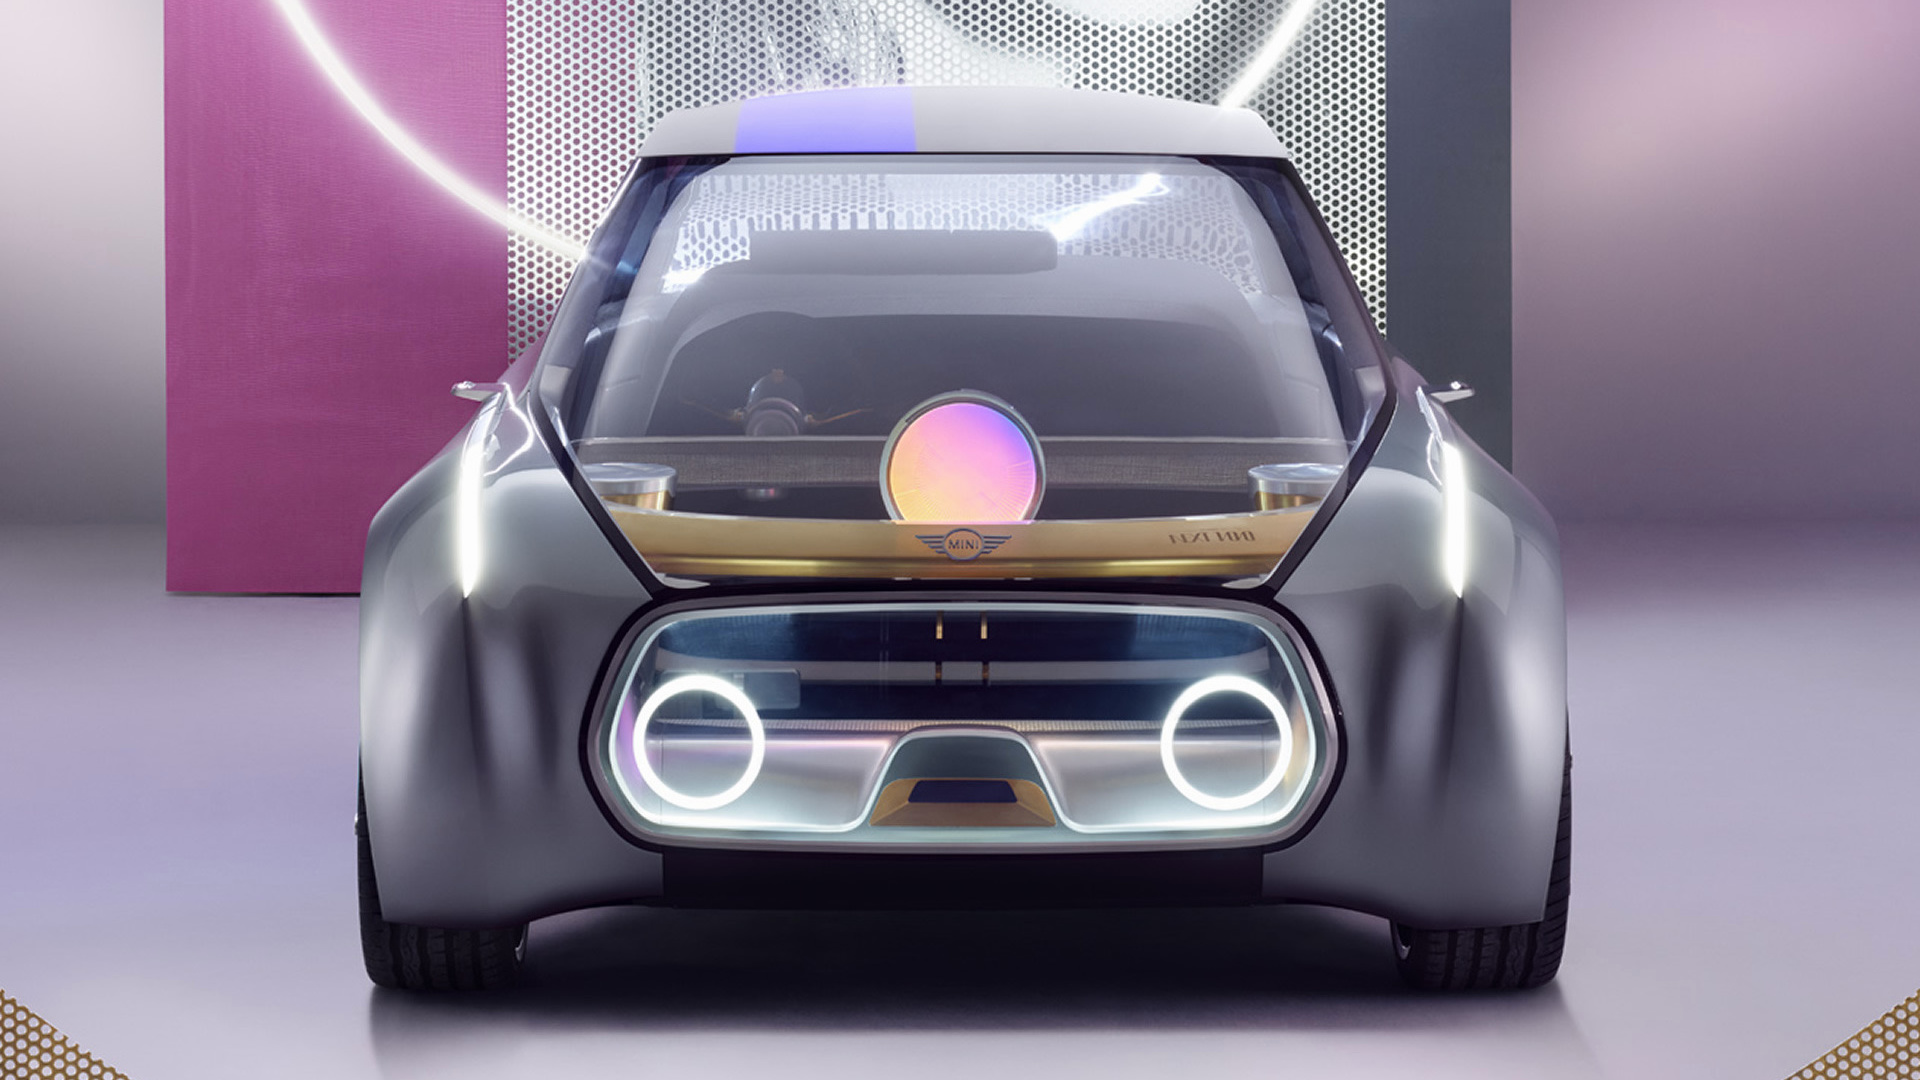 Mini Vision Concept Wallpapers